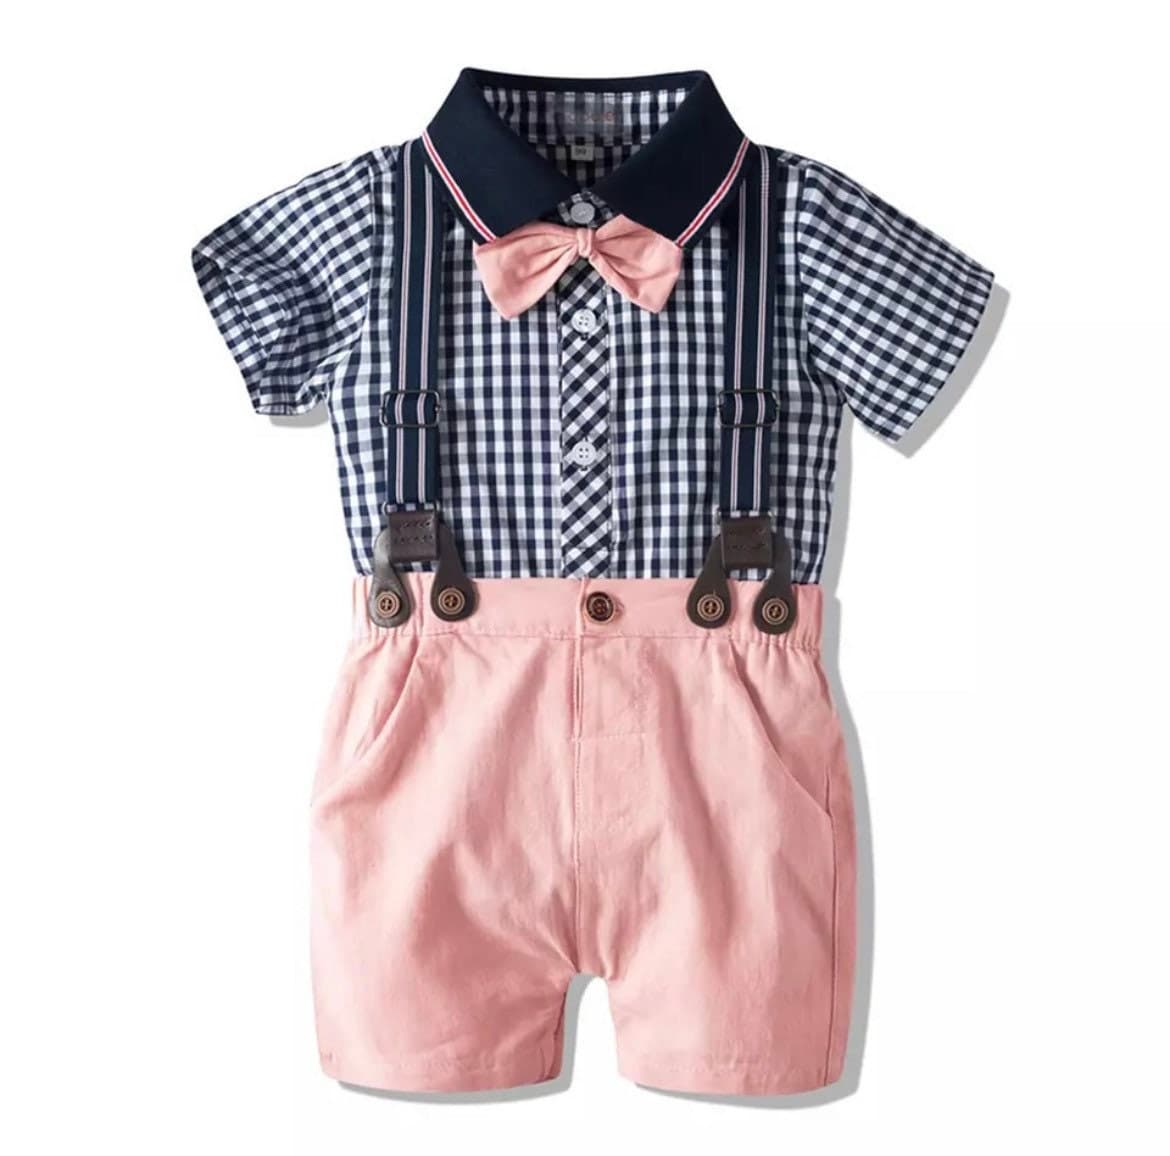 Venice - Baby Boy Suit Set with Pink Check Shirt and Shorts + Bowtie + Suspenders.